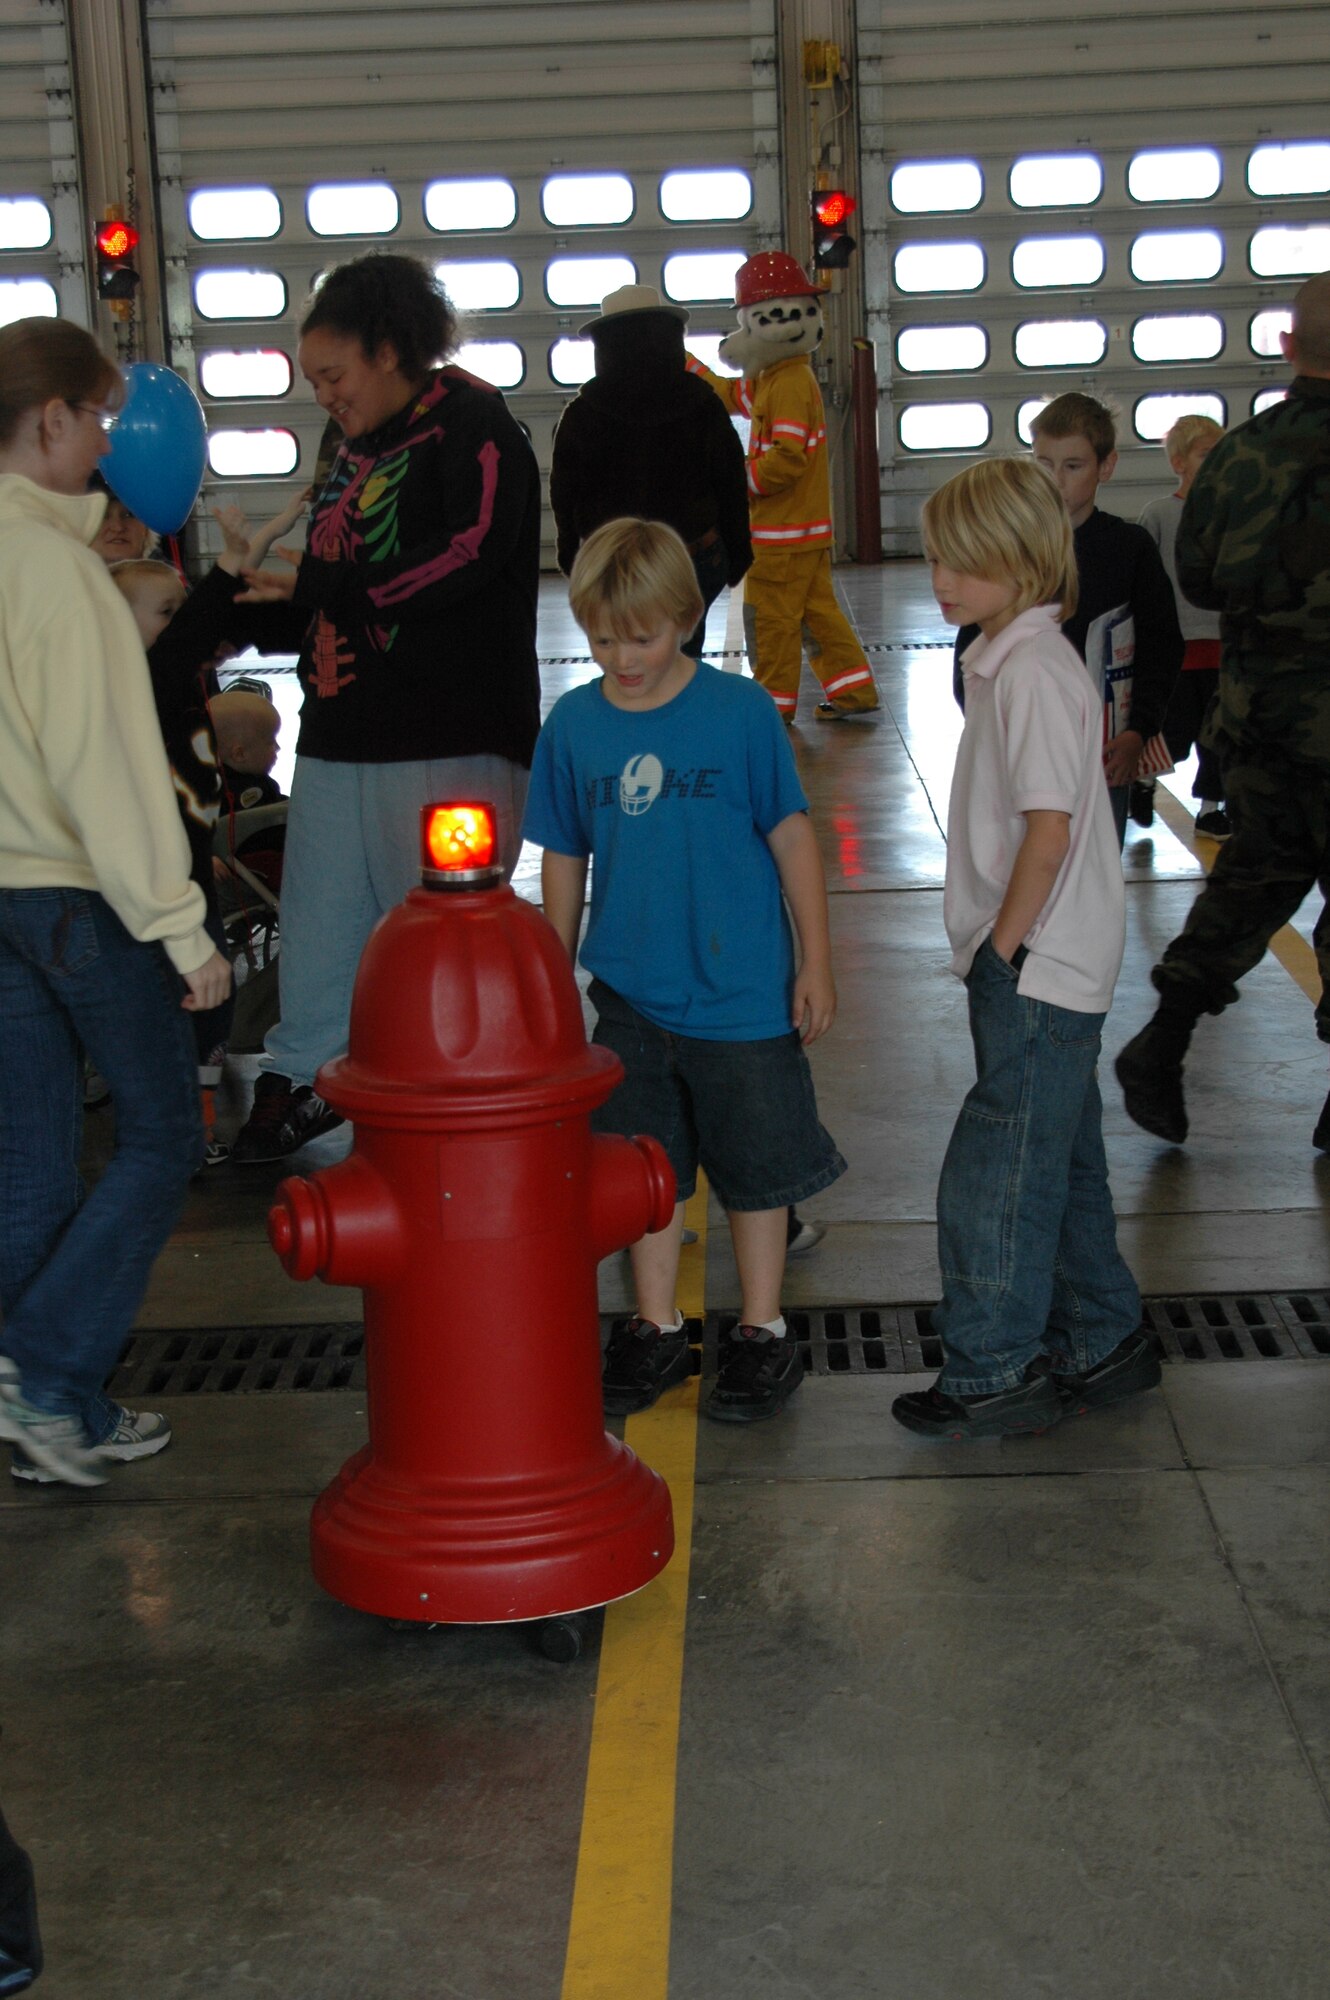 A remote controlled fire hydrant grabs the attention of many during an open house at the fire department Oct. 6. The open house was preceeded by a Fire Prevention Week Parade. This year's theme is Practice your Escape Plan.
(U.S. Air Force photo/Airman 1st Class Kimberly Moore Limrick)